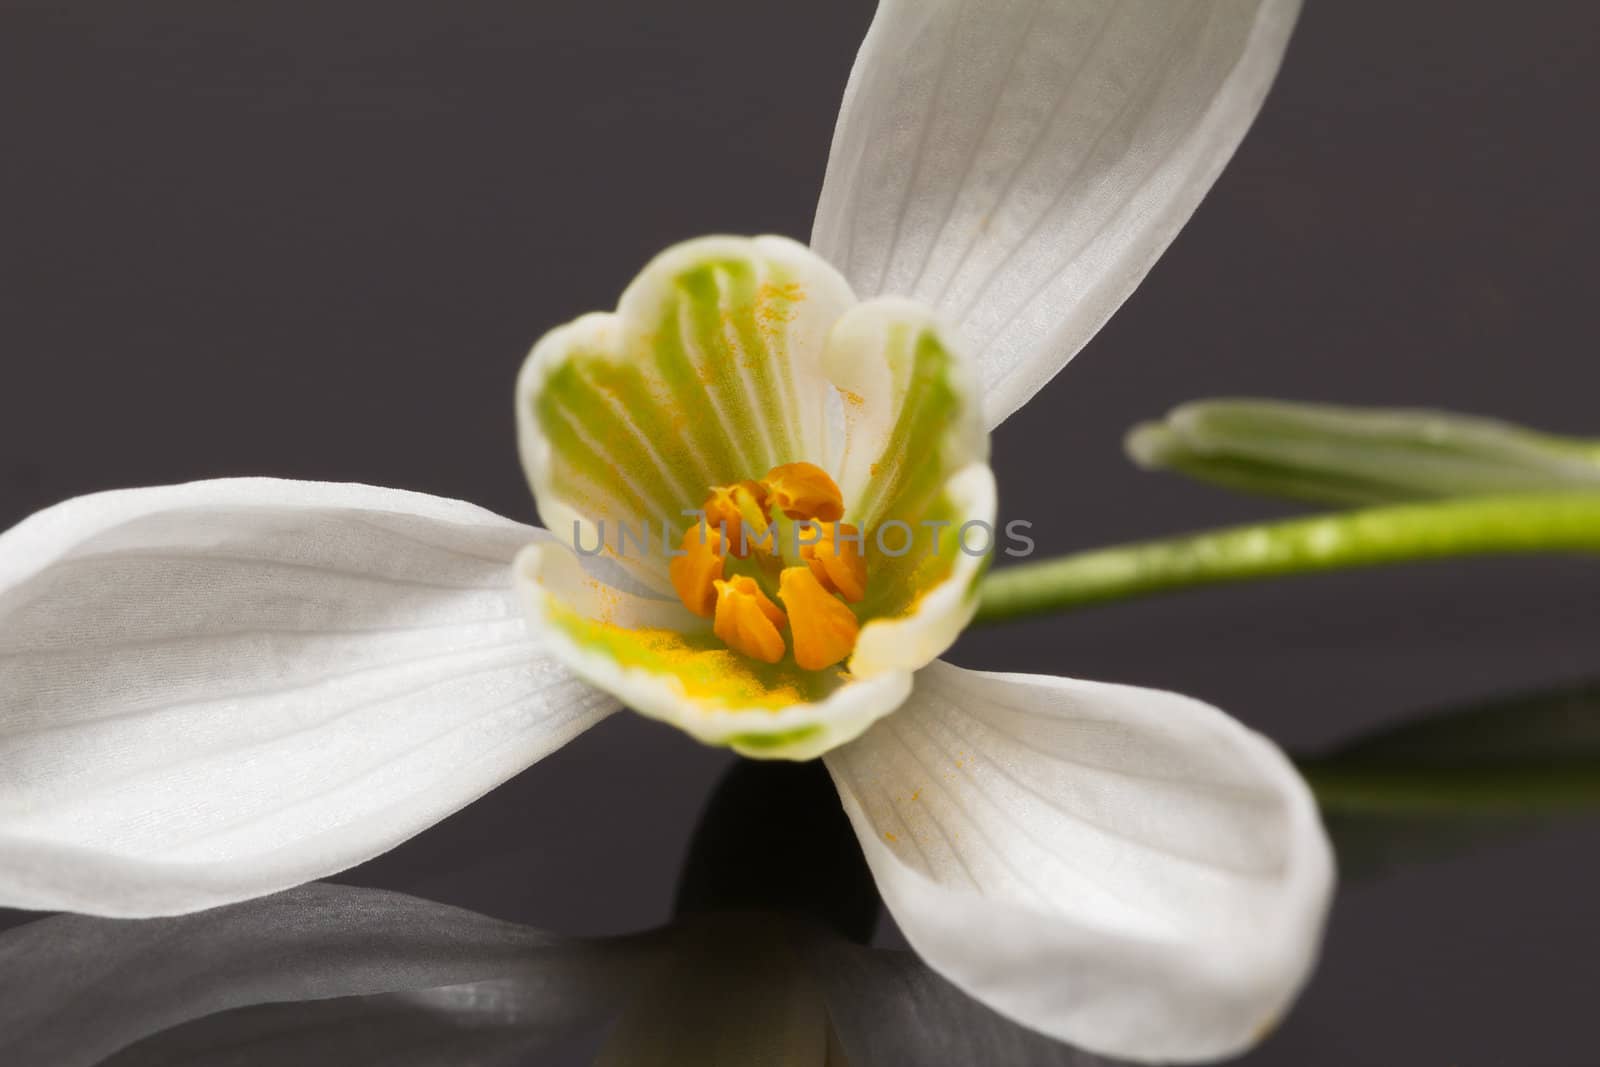 single flower of snowdrop isolated on black background